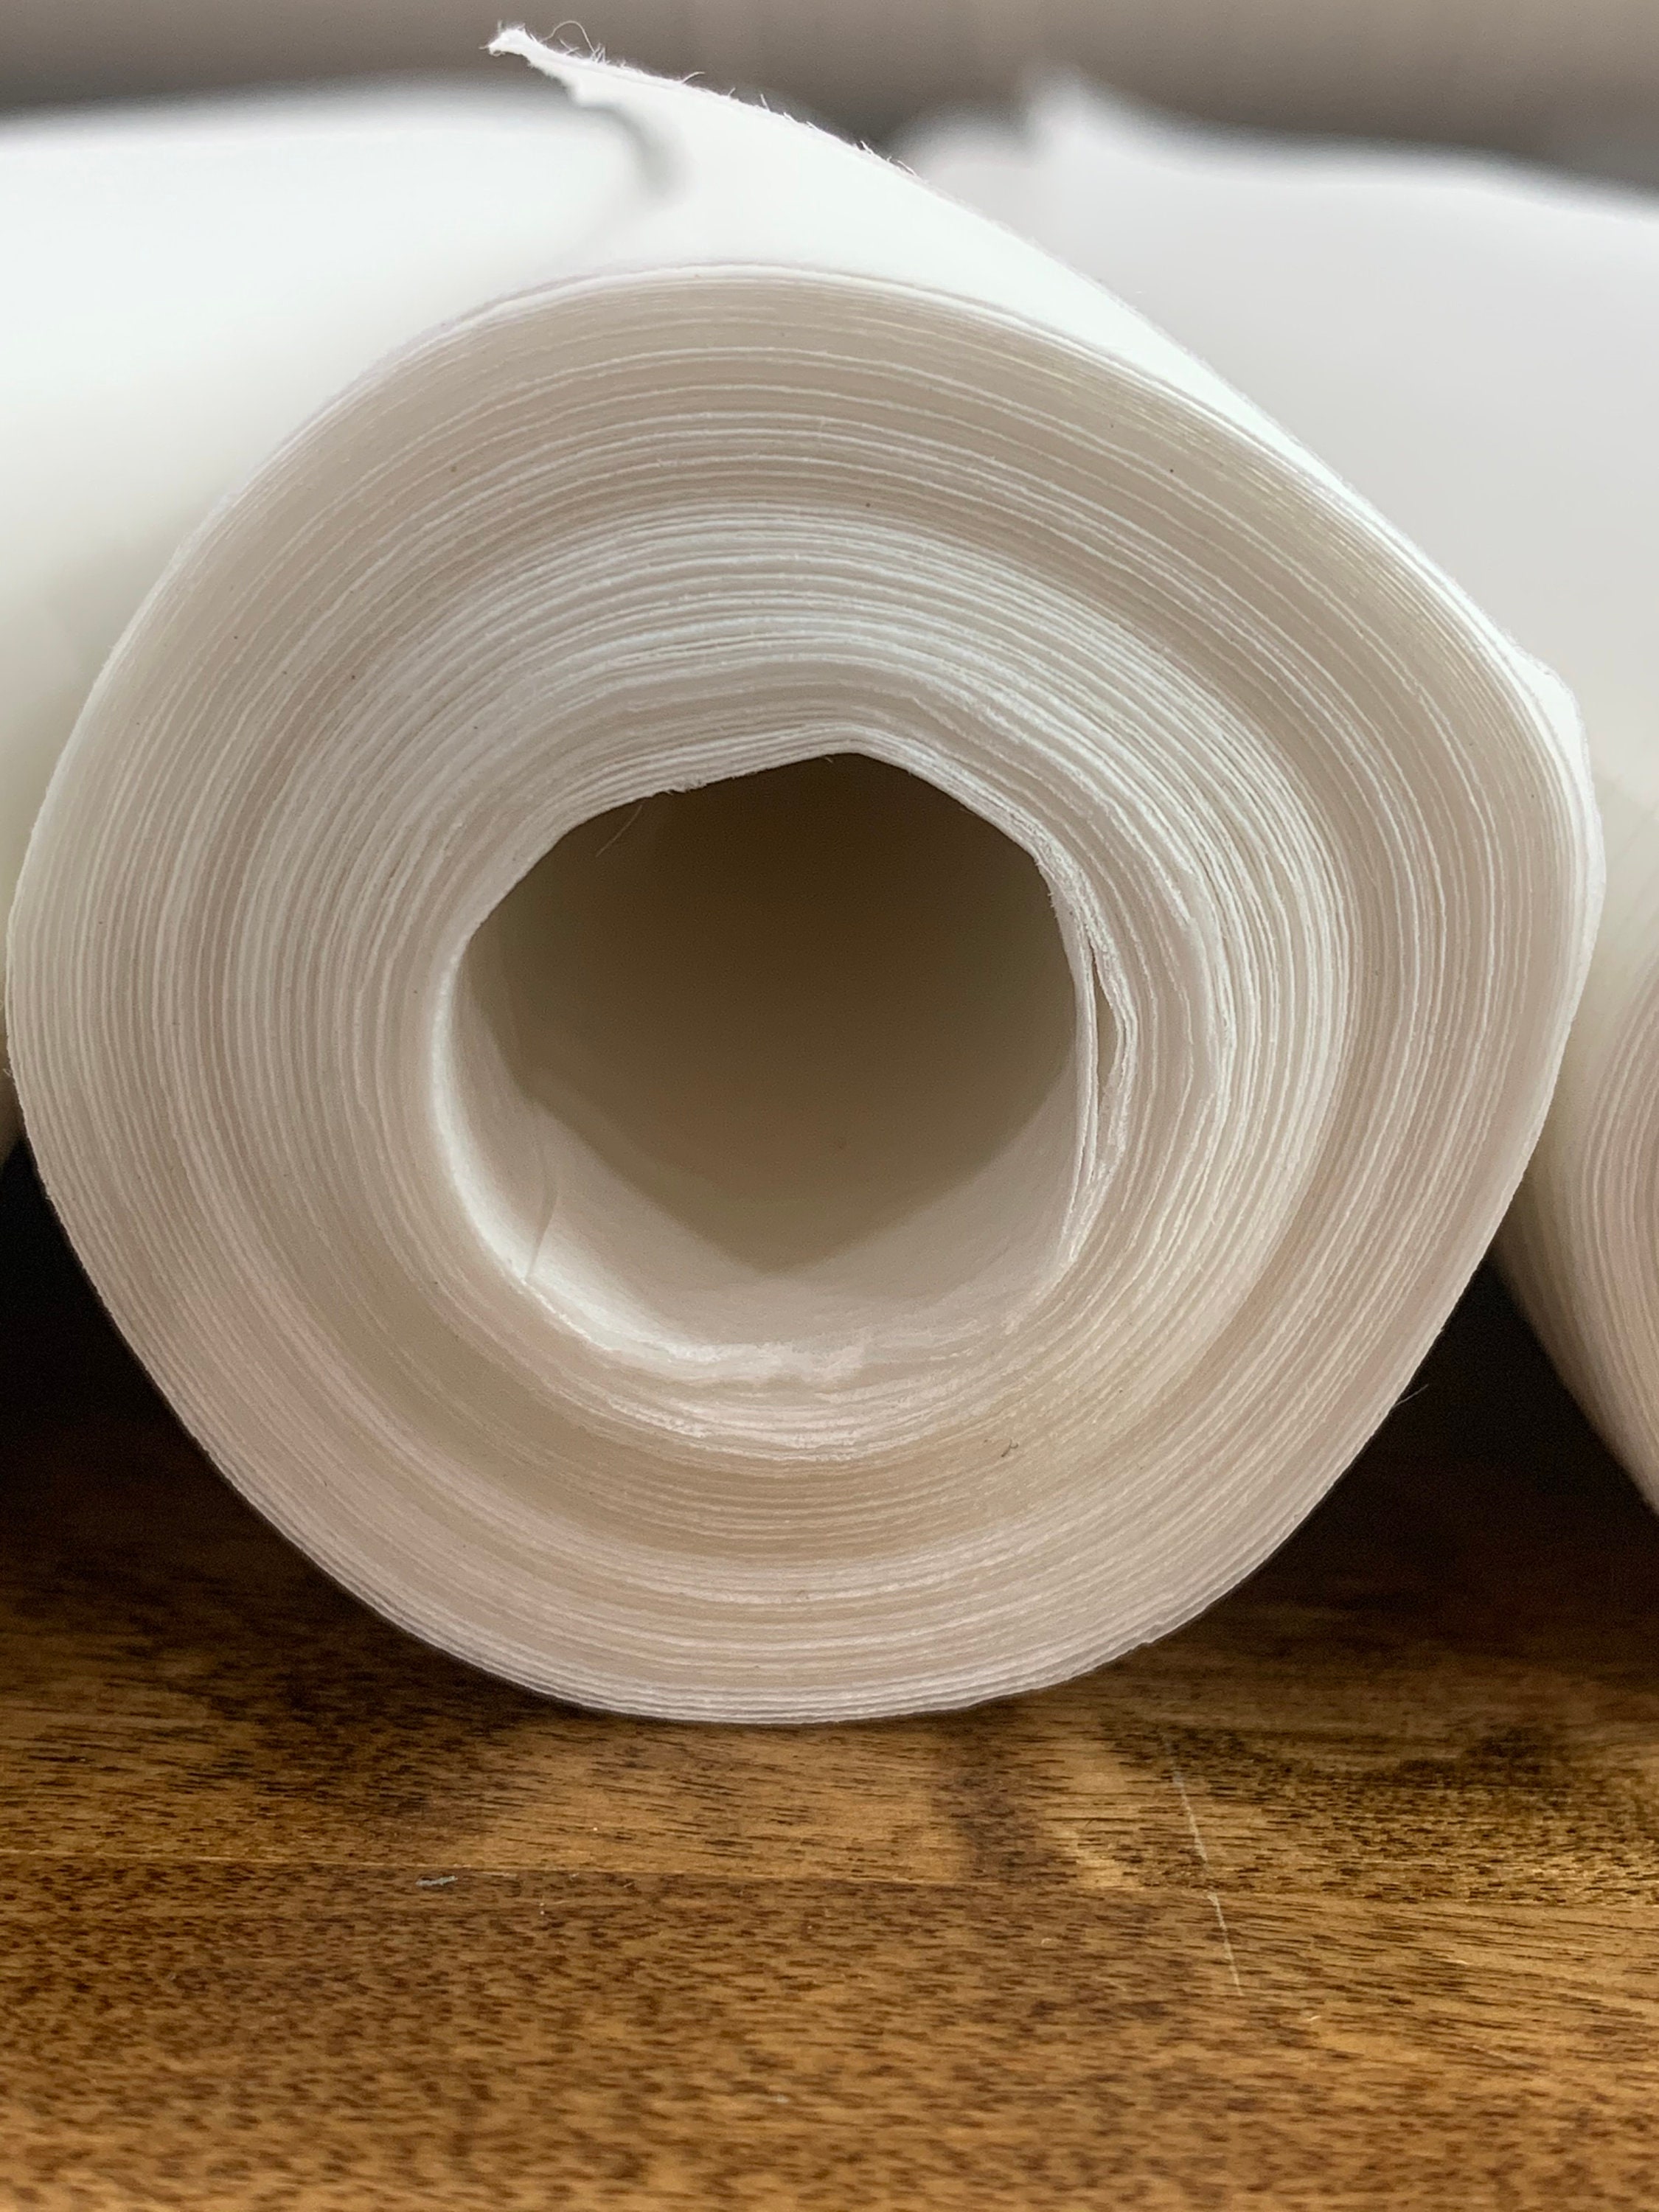 Mr. Pen- Tracing Paper Roll, 12, 20 Yards, White Tracing Paper, Tracing Paper, Trace Paper, Trace Paper Roll, Pattern Paper, Drafting Paper, Tracing